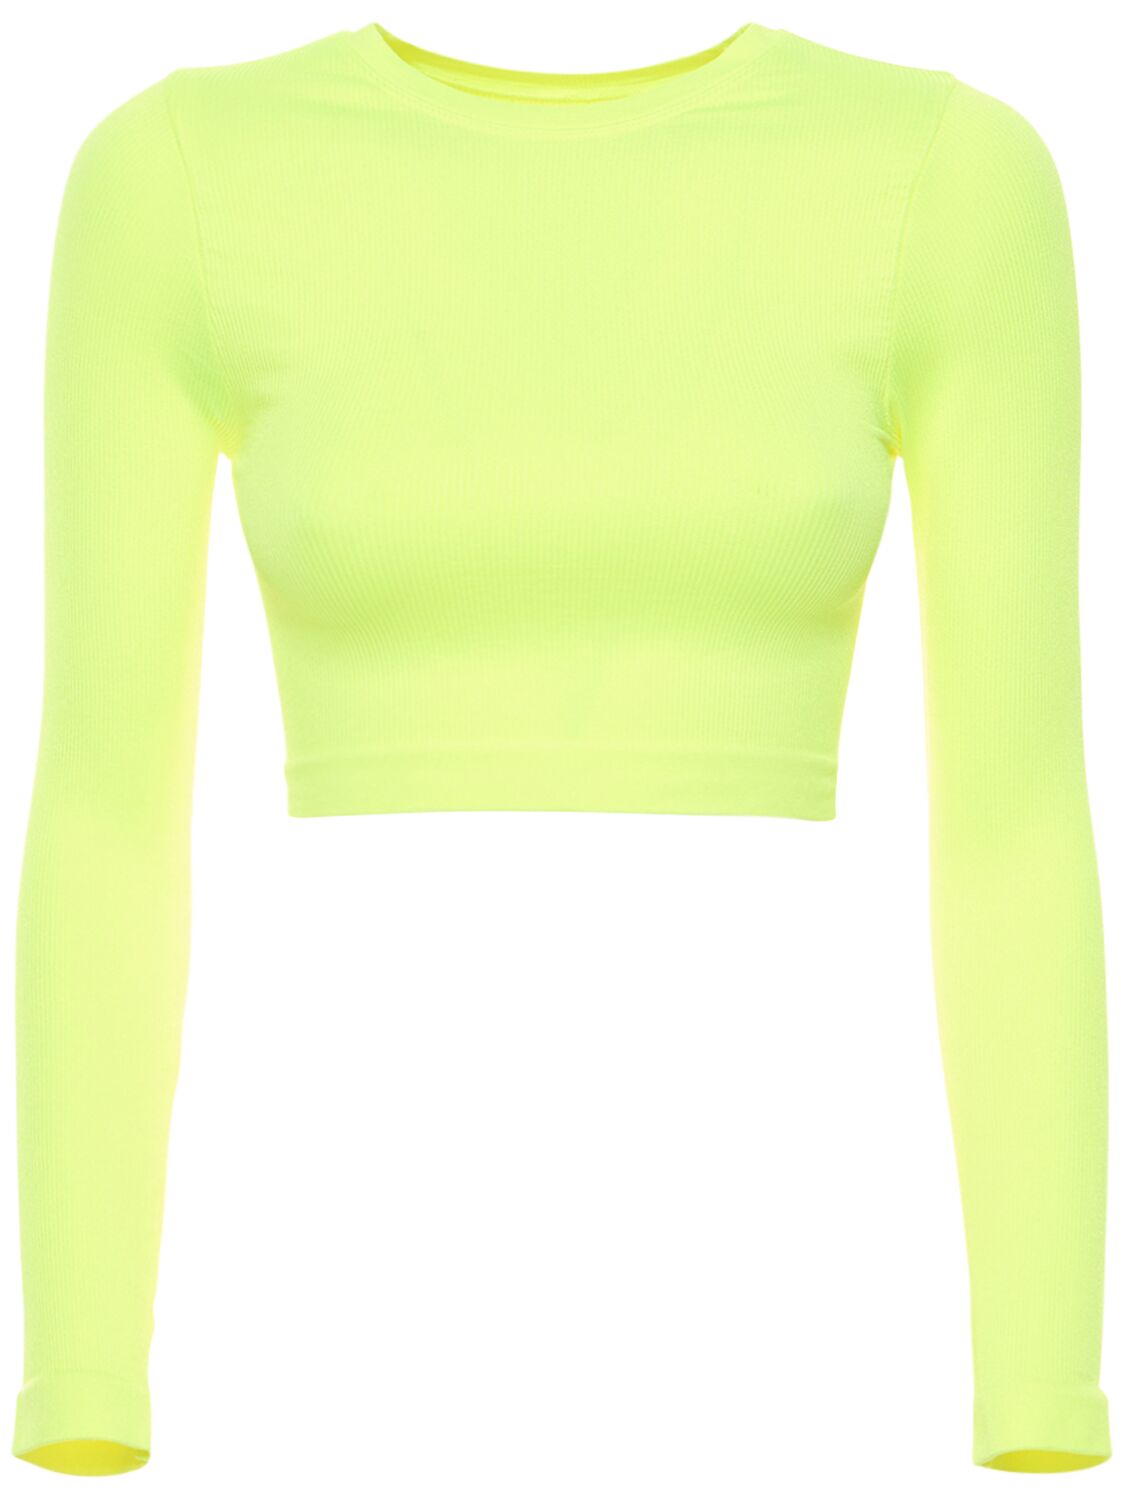 Prism Squared Evoke Ribbed Crop Top In Yellow